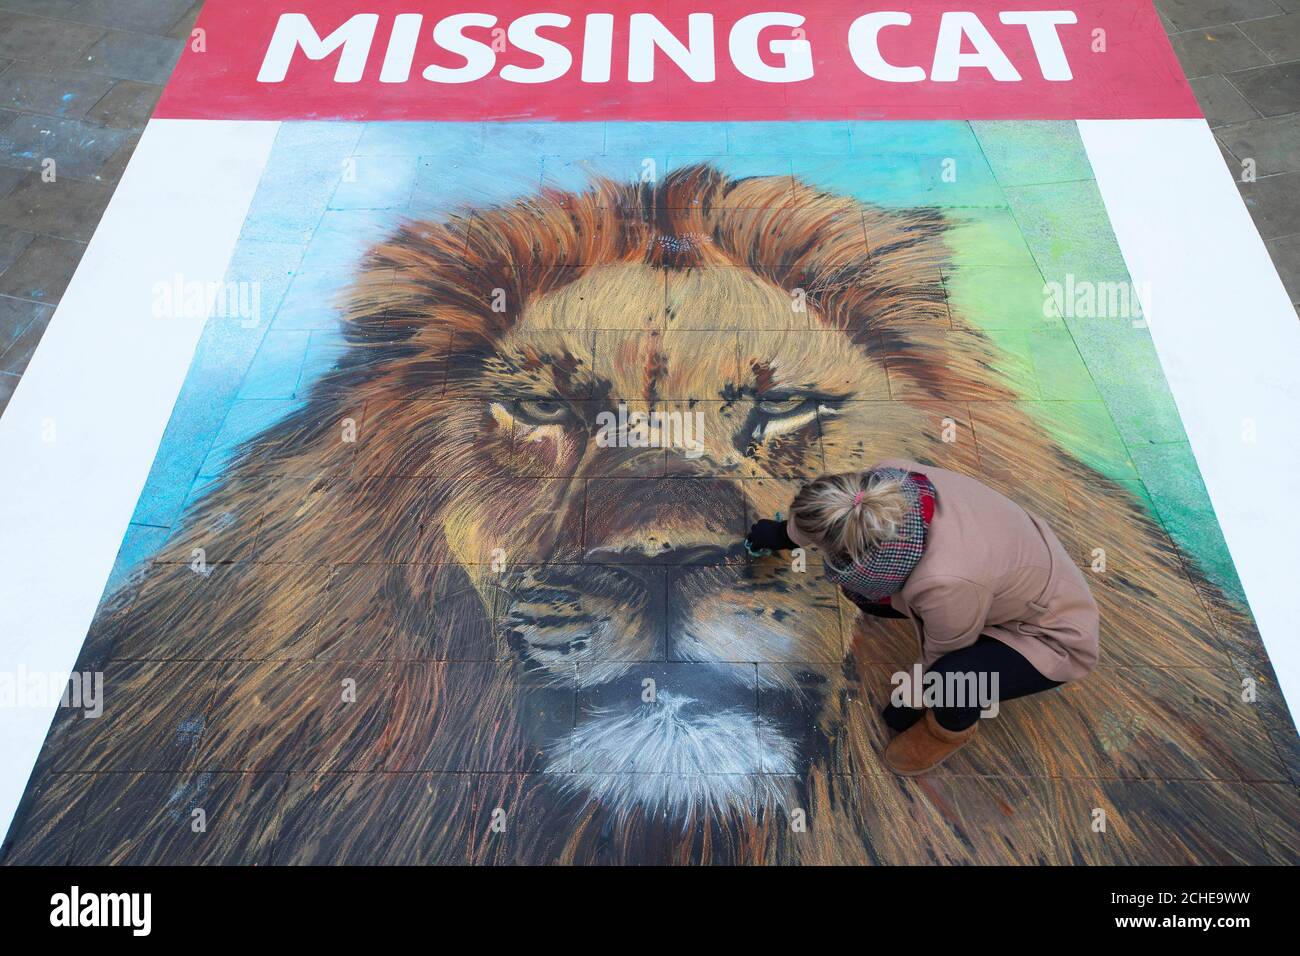 A 6 x 4 meter chalk 'missing cat' poster, commissioned by National Geographic's Big Cats Initiative and created by street artist Dean Zeus Colman, is unveiled in Paternoster Square, London to highlight the worrying demise of lions. Stock Photo